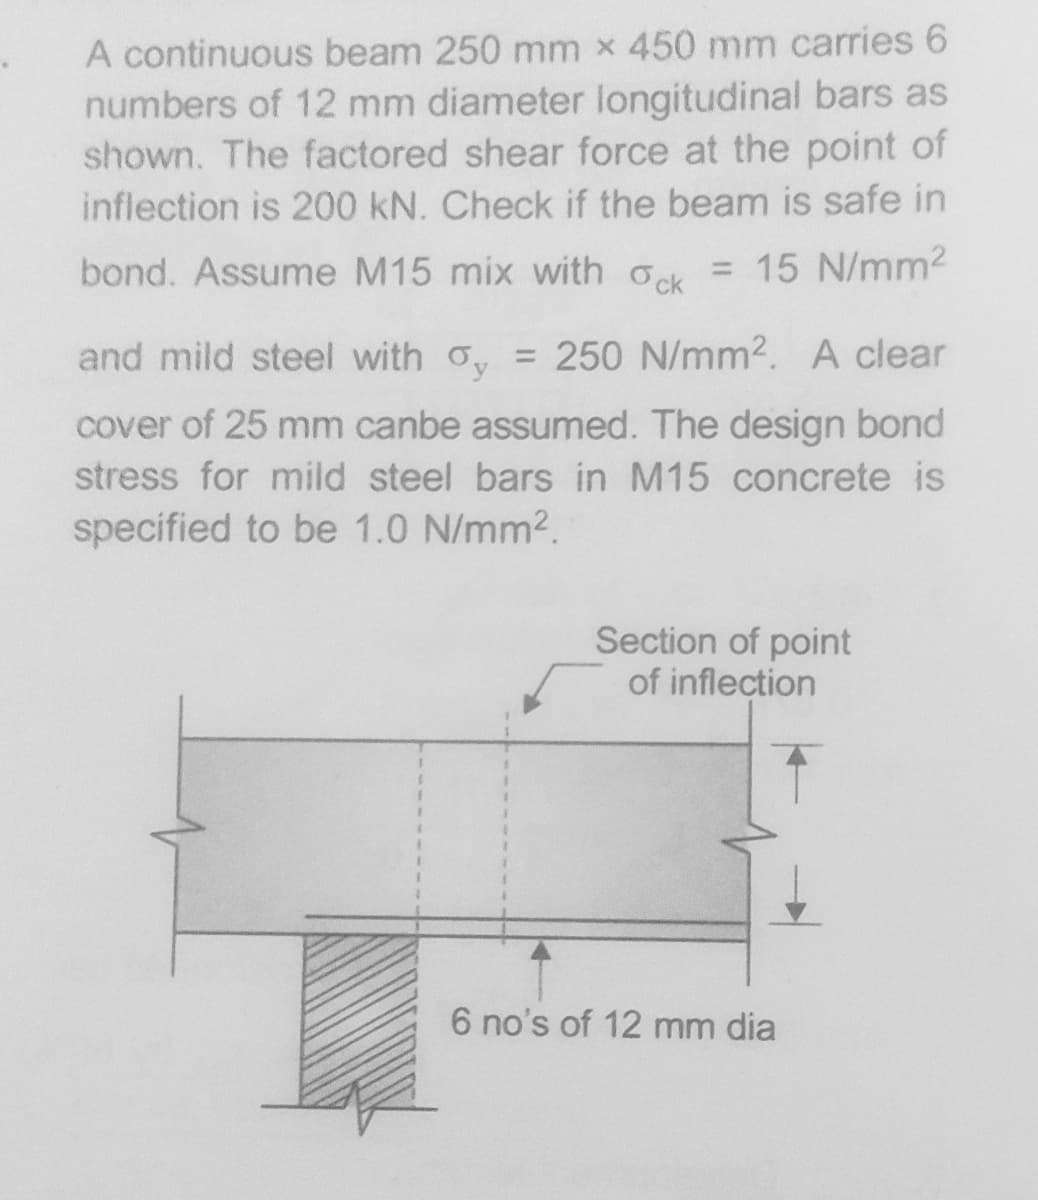 A continuous beam 250 mm x 450 mm carries 6
numbers of 12 mm diameter longitudinal bars as
shown. The factored shear force at the point of
inflection is 200 kN. Check if the beam is safe in
bond. Assume M15 mix with ok = 15 N/mm2
and mild steel with o, = 250 N/mm2. A clear
%3D
cover of 25 mm canbe assumed. The design bond
stress for mild steel bars in M15 concrete is
specified to be 1.0 N/mm2.
Section of point
of inflection
6 no's of 12 mm dia
